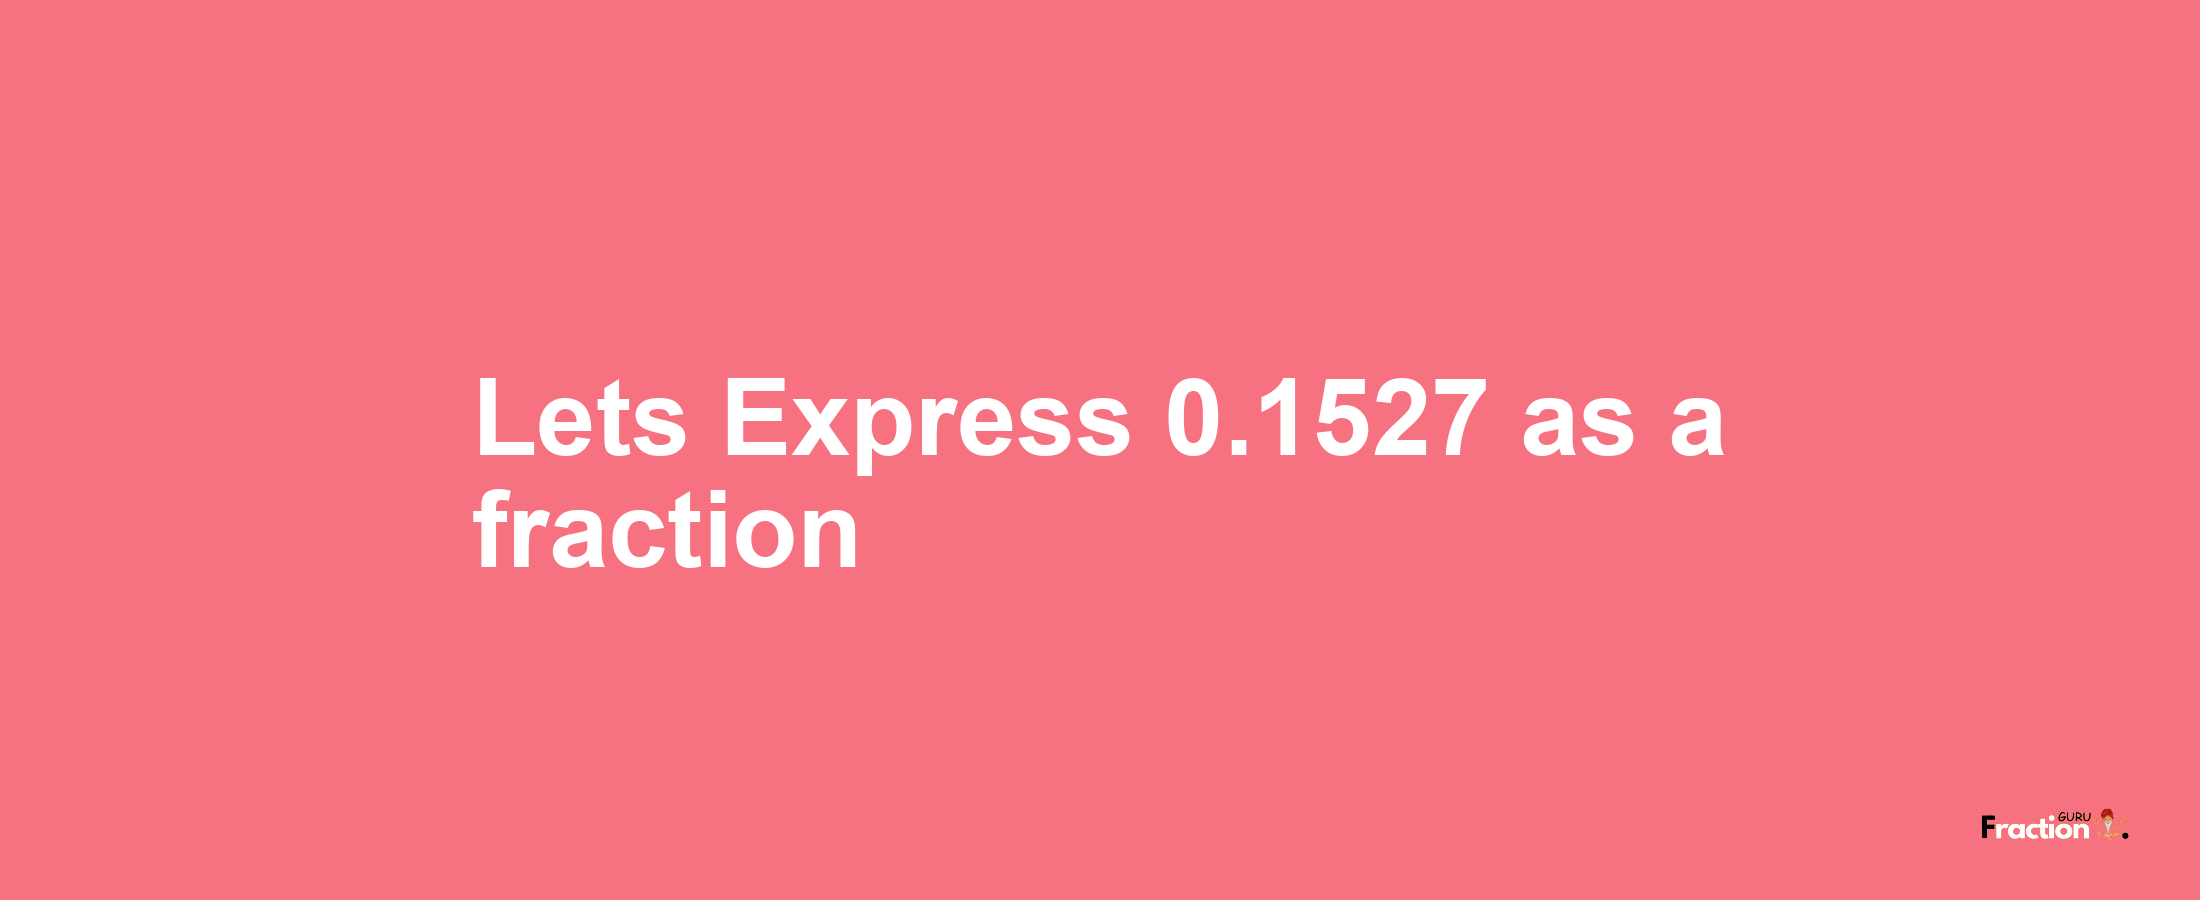 Lets Express 0.1527 as afraction